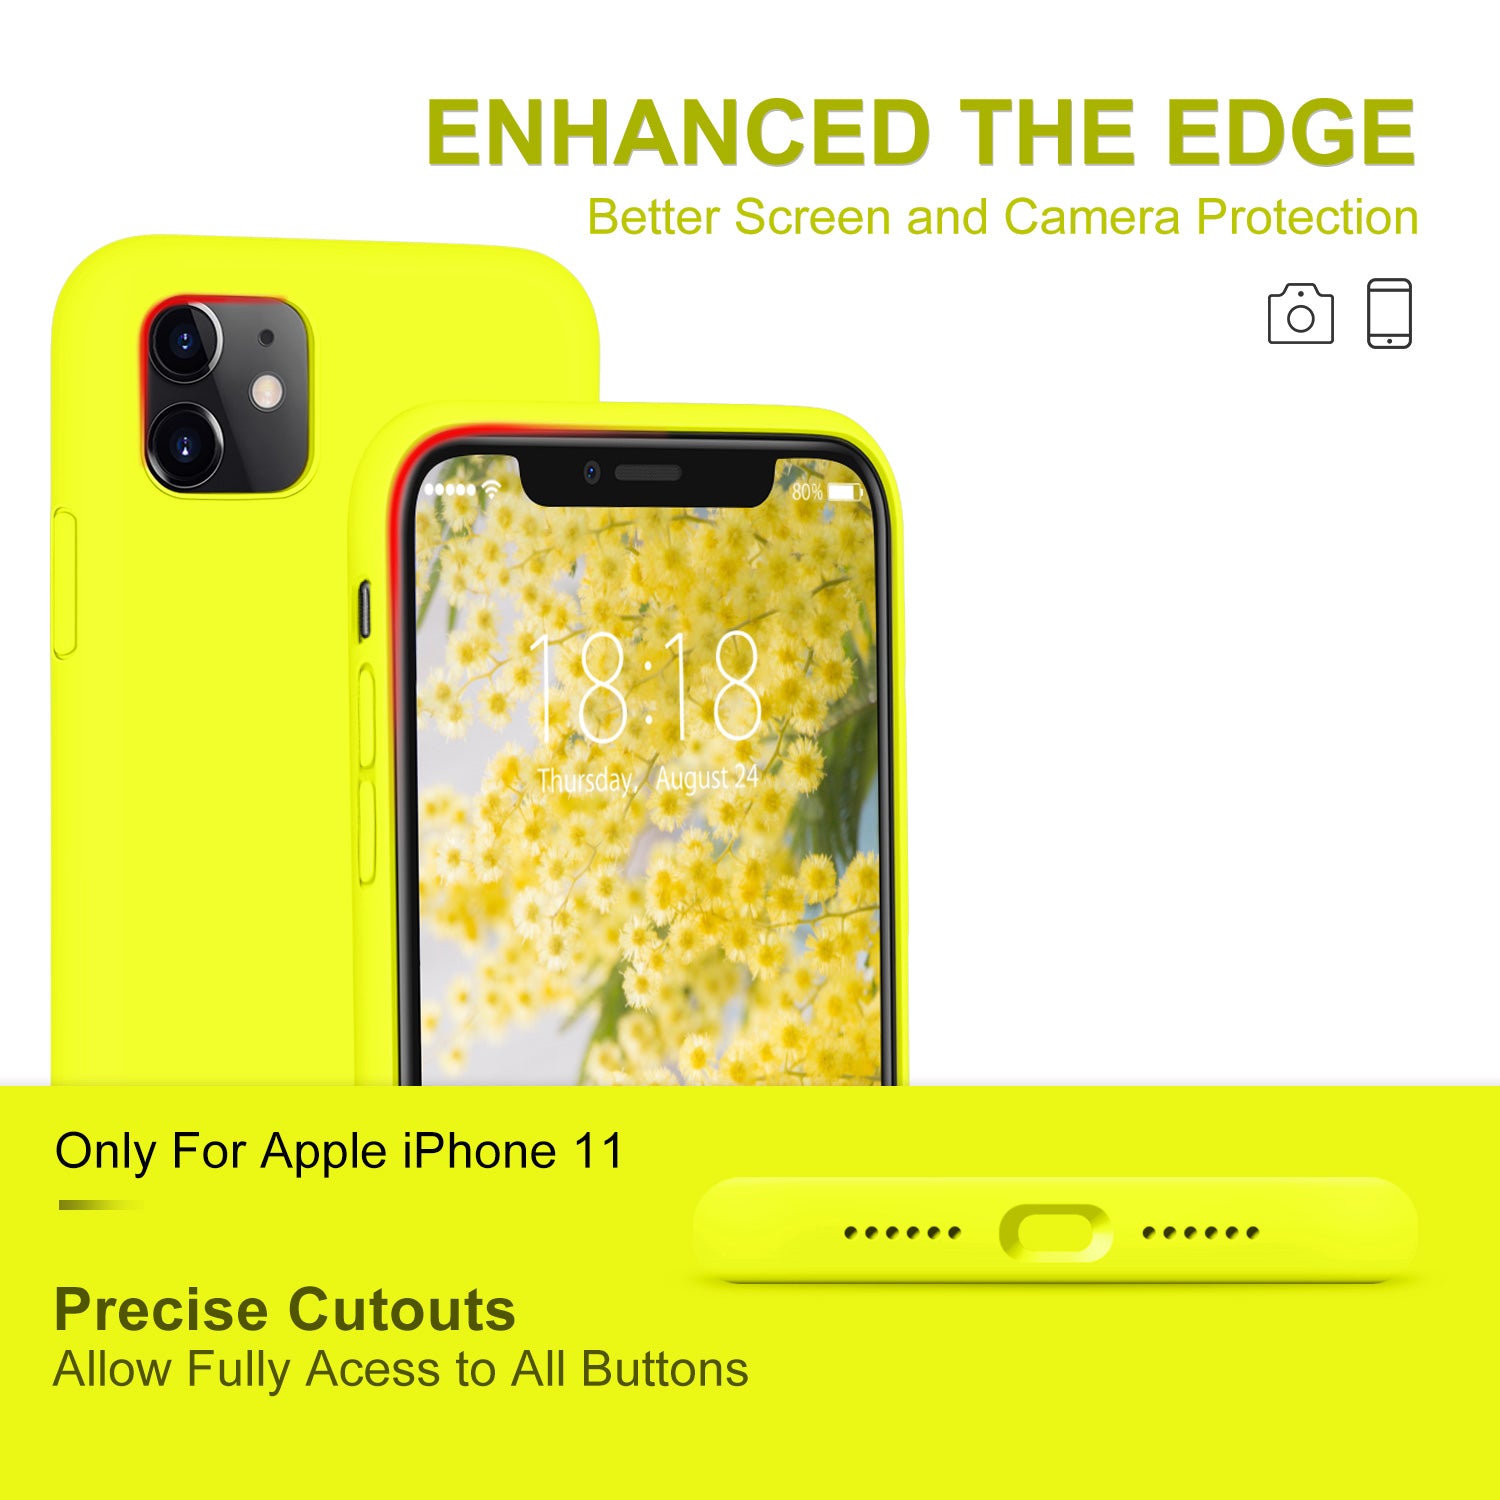 DTTO Compatible with iPhone 11 Case, [Romance Series] Full Covered Silicone Cover [Enhanced Camera and Screen Protection] with Honeycomb Grid Pattern Cushion for iPhone 11 6.1” 2019, Mint Green